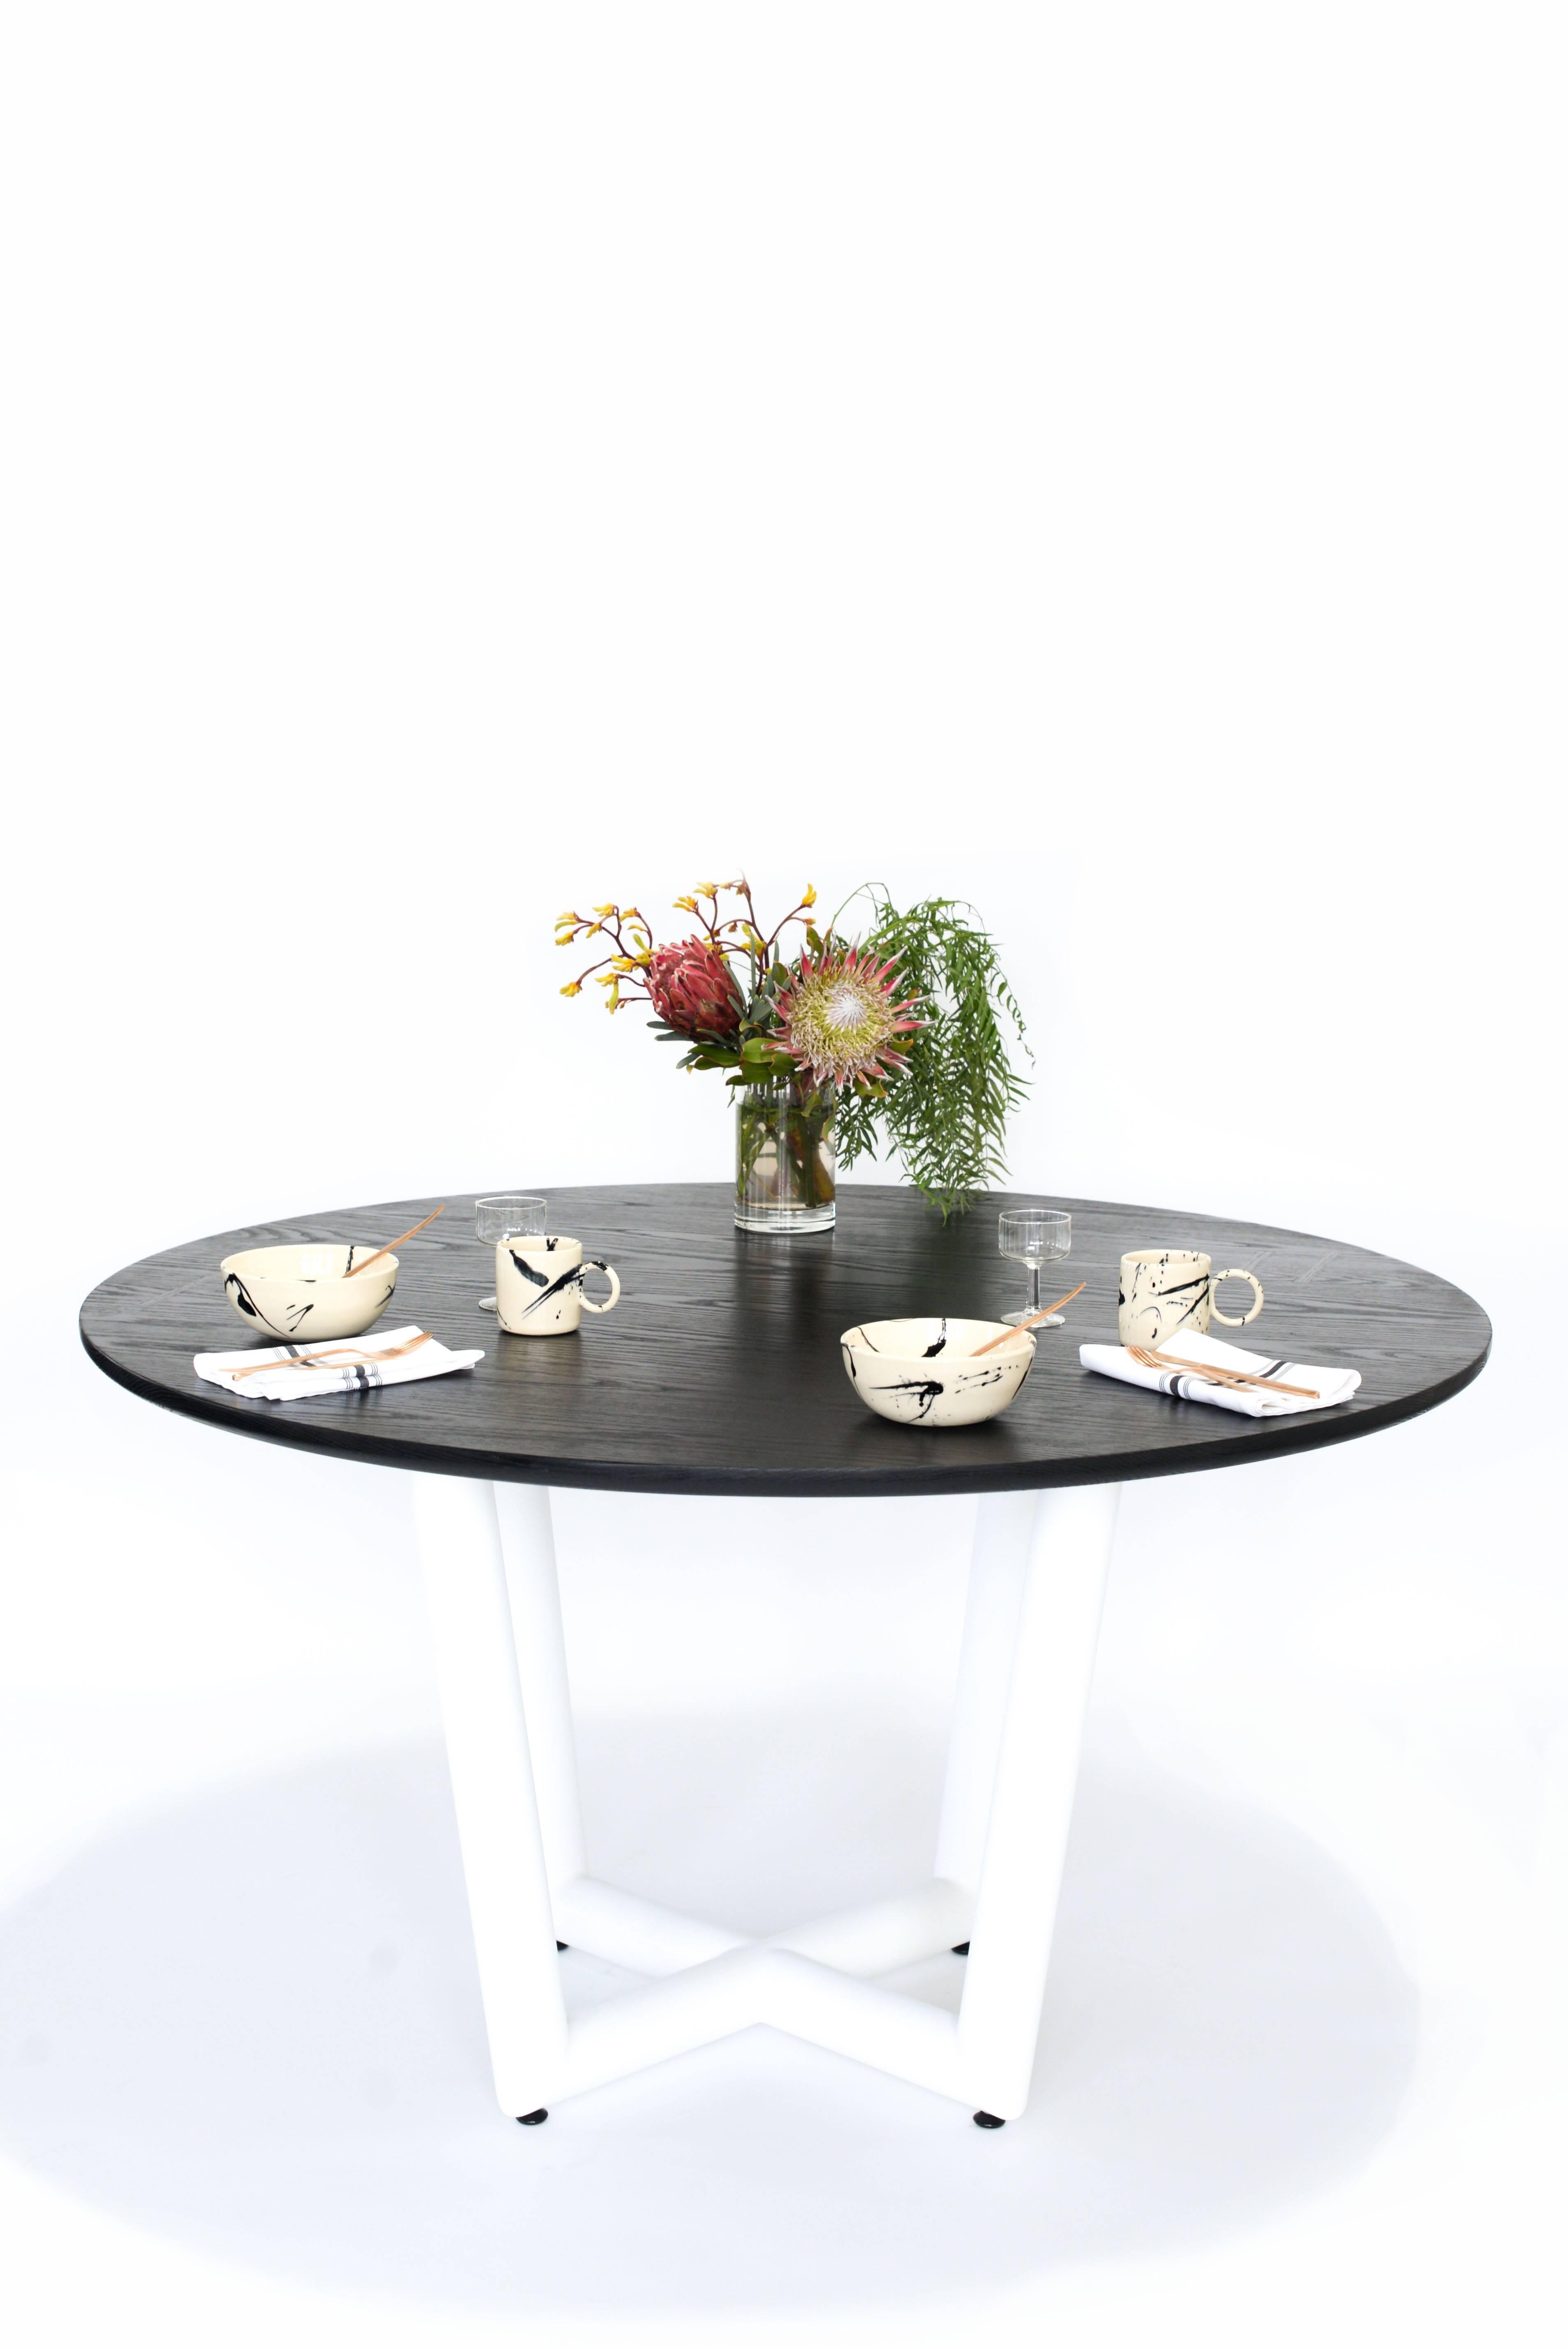 Metal Base, hand crafted solid wood constructed table top. Made in Los Angeles, California. 

Shown in ebonized oak round slab top, matte white powder coated base.  

Table top is available in ebonized oak, white oak, solid walnut, maple, ash, and